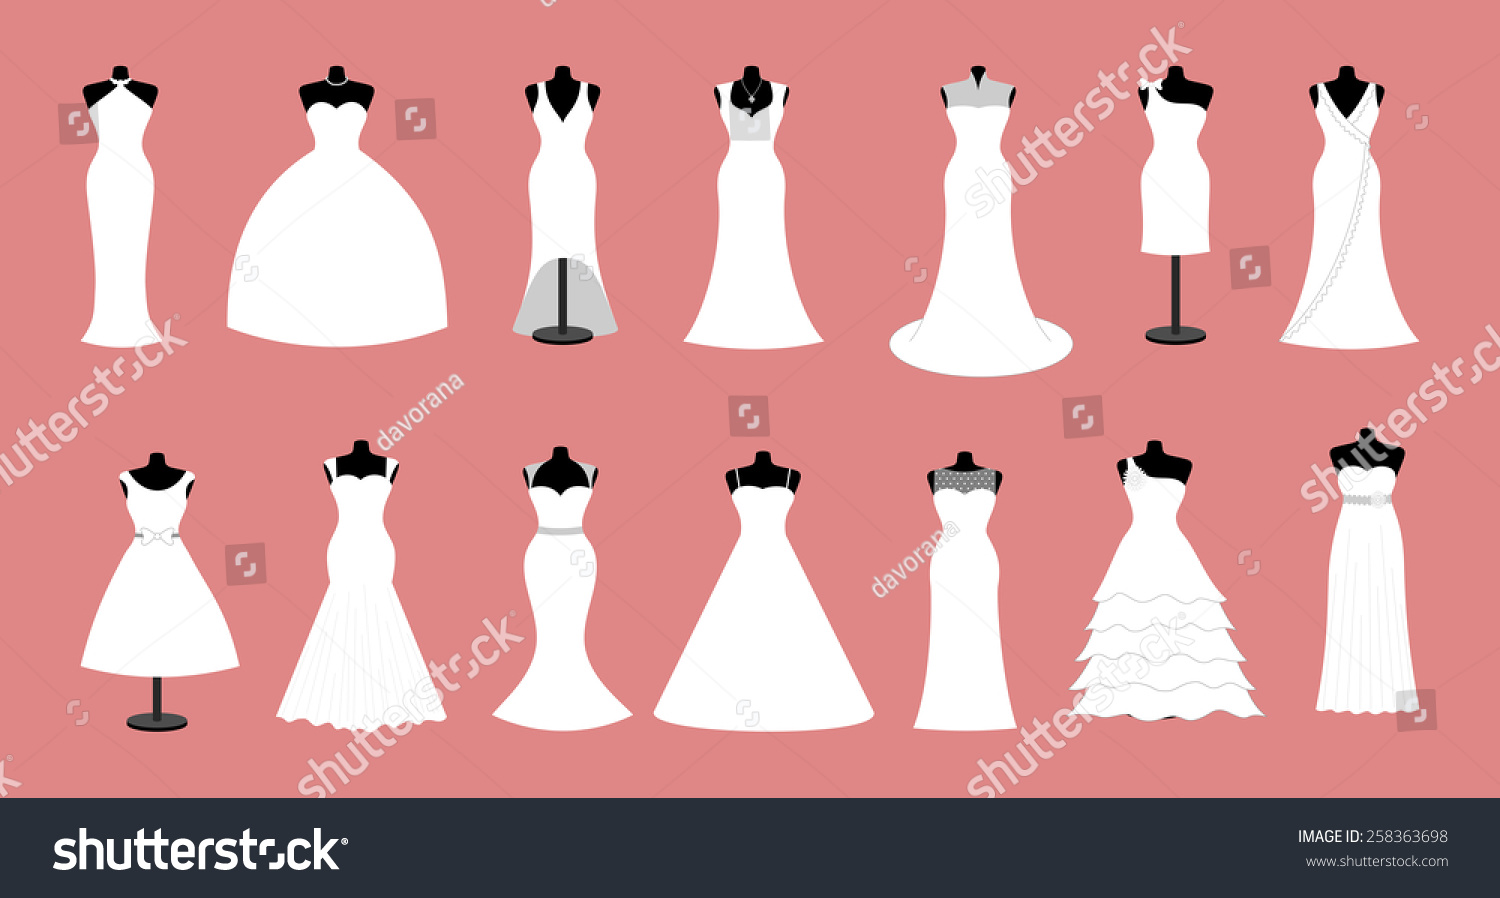 SVG of White wedding dresses icon collection. Set of 14 mannequin wear different design of modern style dress with jewelry, diamond and pearl necklace Vector art image illustration isolated on red background svg